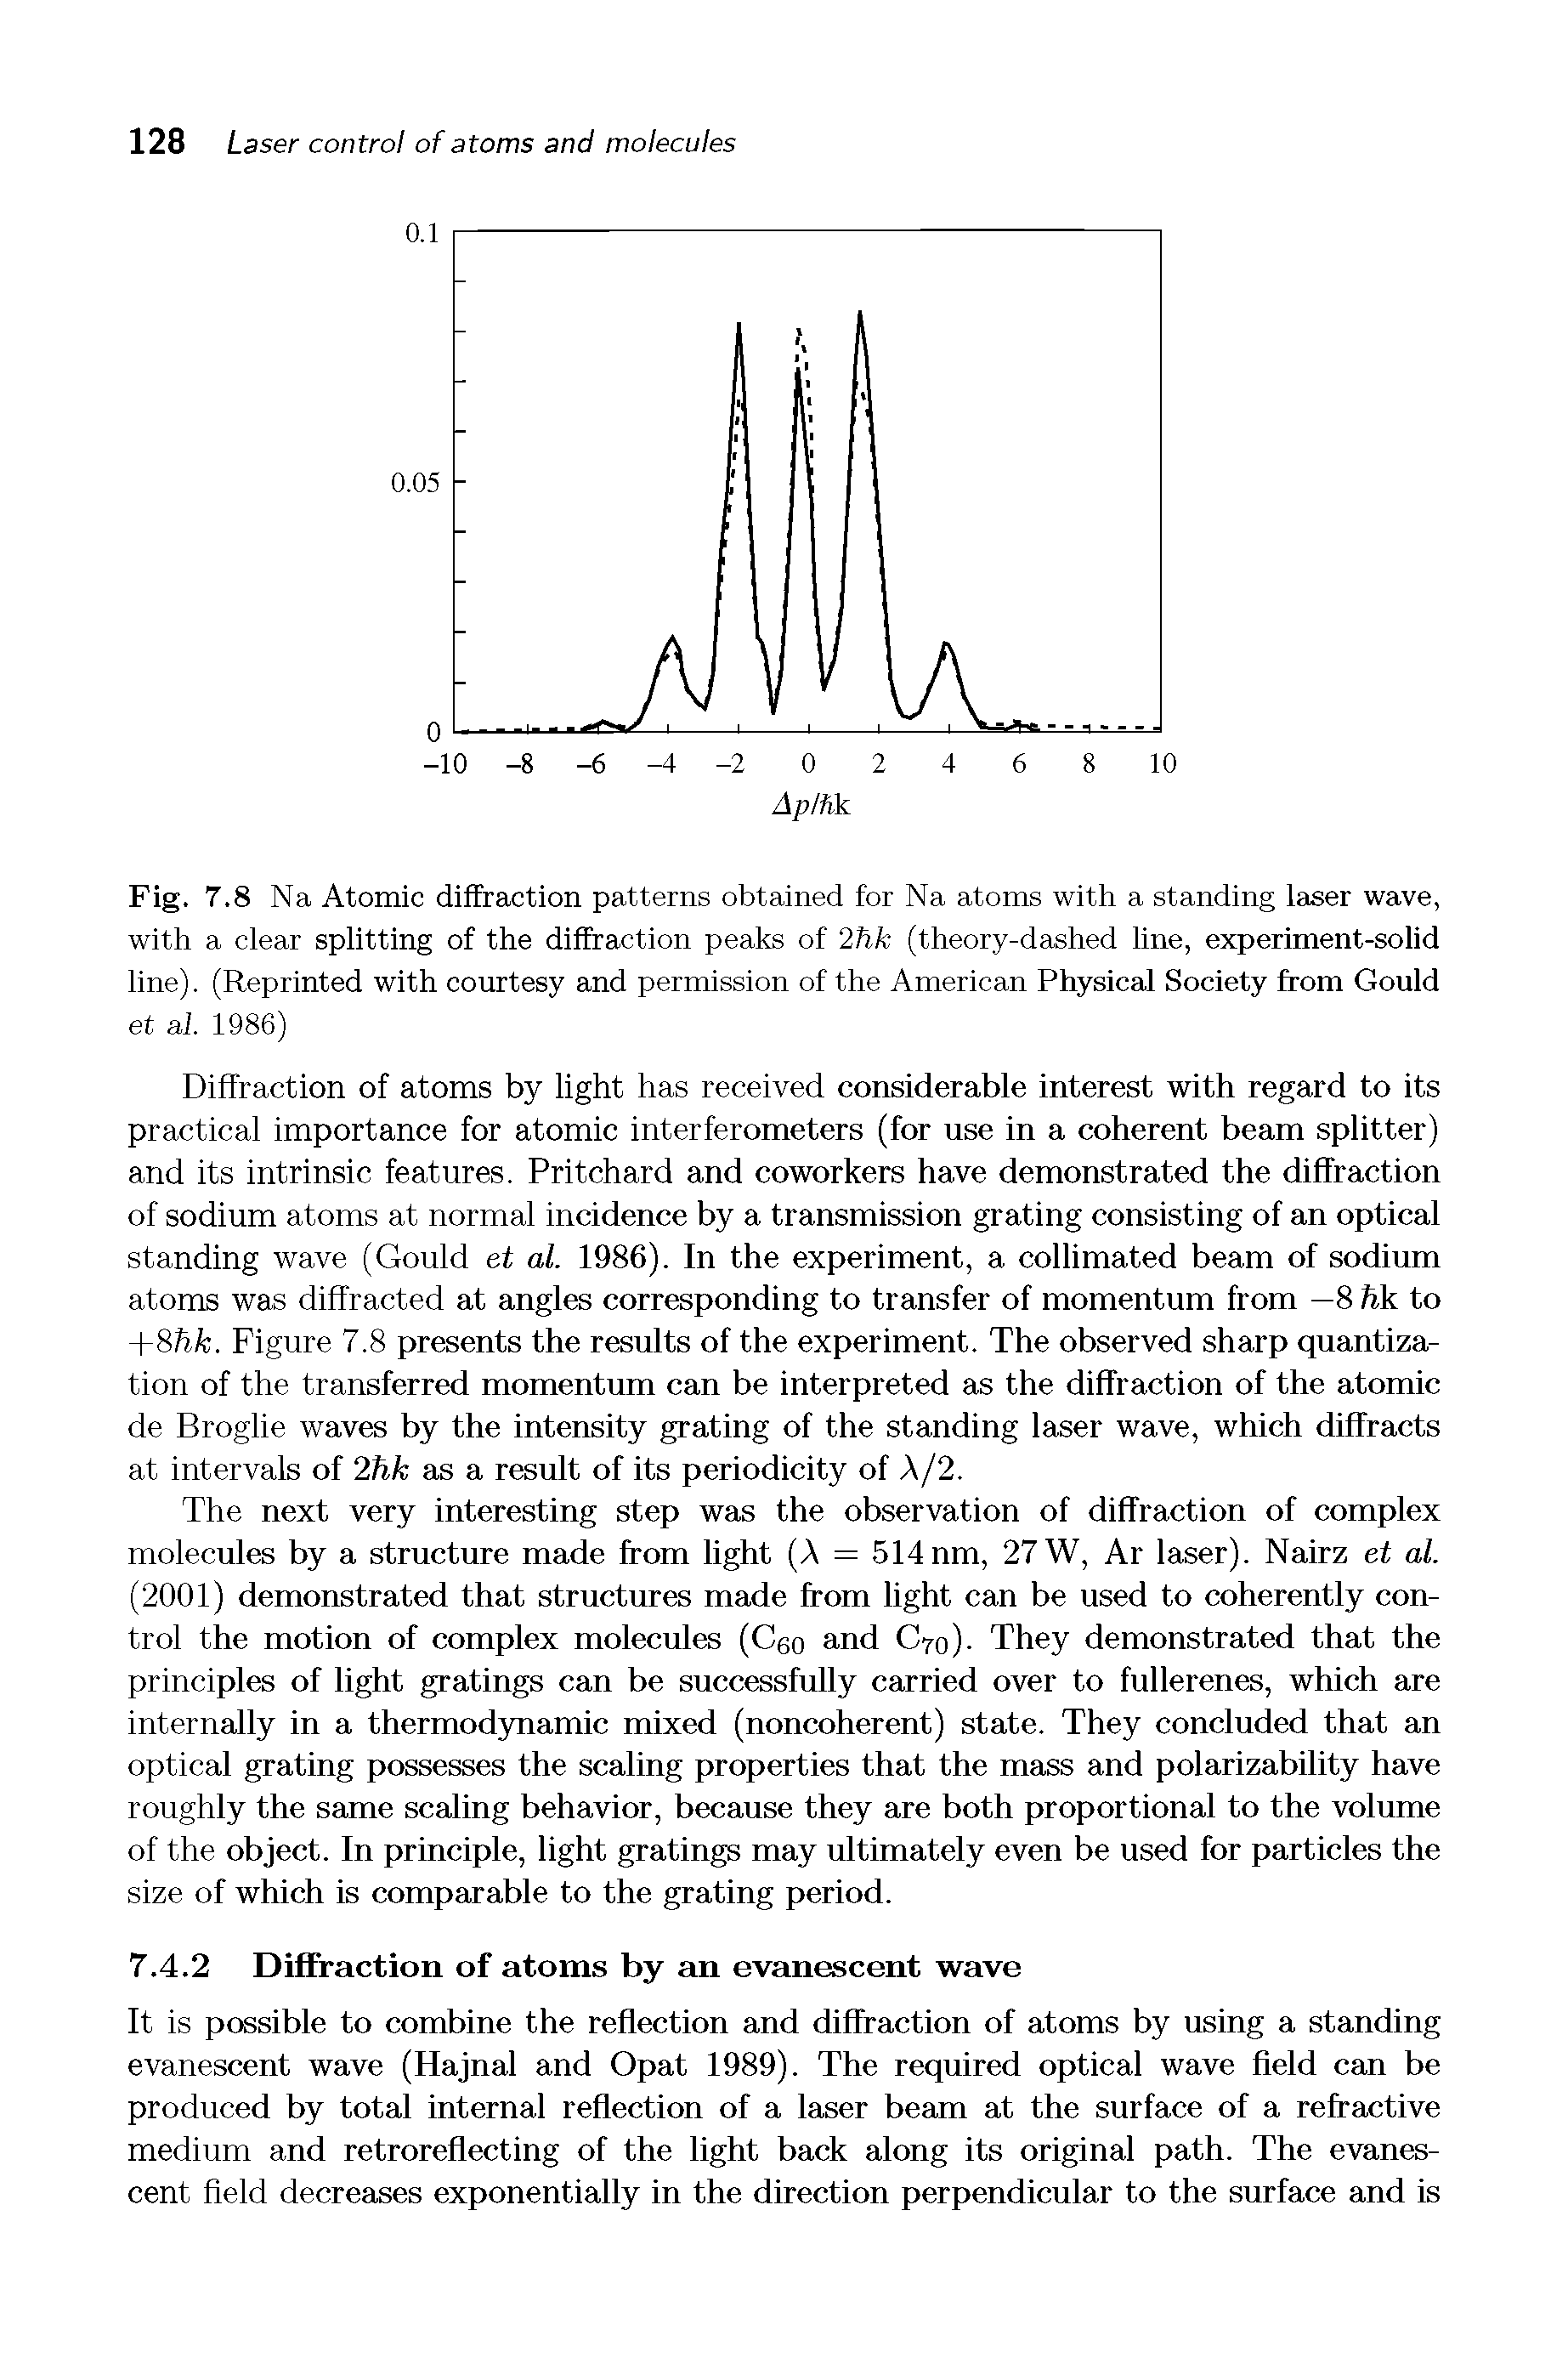 Fig. 7.8 Na Atomic diffraction patterns obtained for Na atoms with a standing laser wave, with a clear splitting of the diffraction peaks of 2hk (theory-dashed line, experiment-solid line). (Reprinted with courtesy and permission of the American Physical Society from Gould...